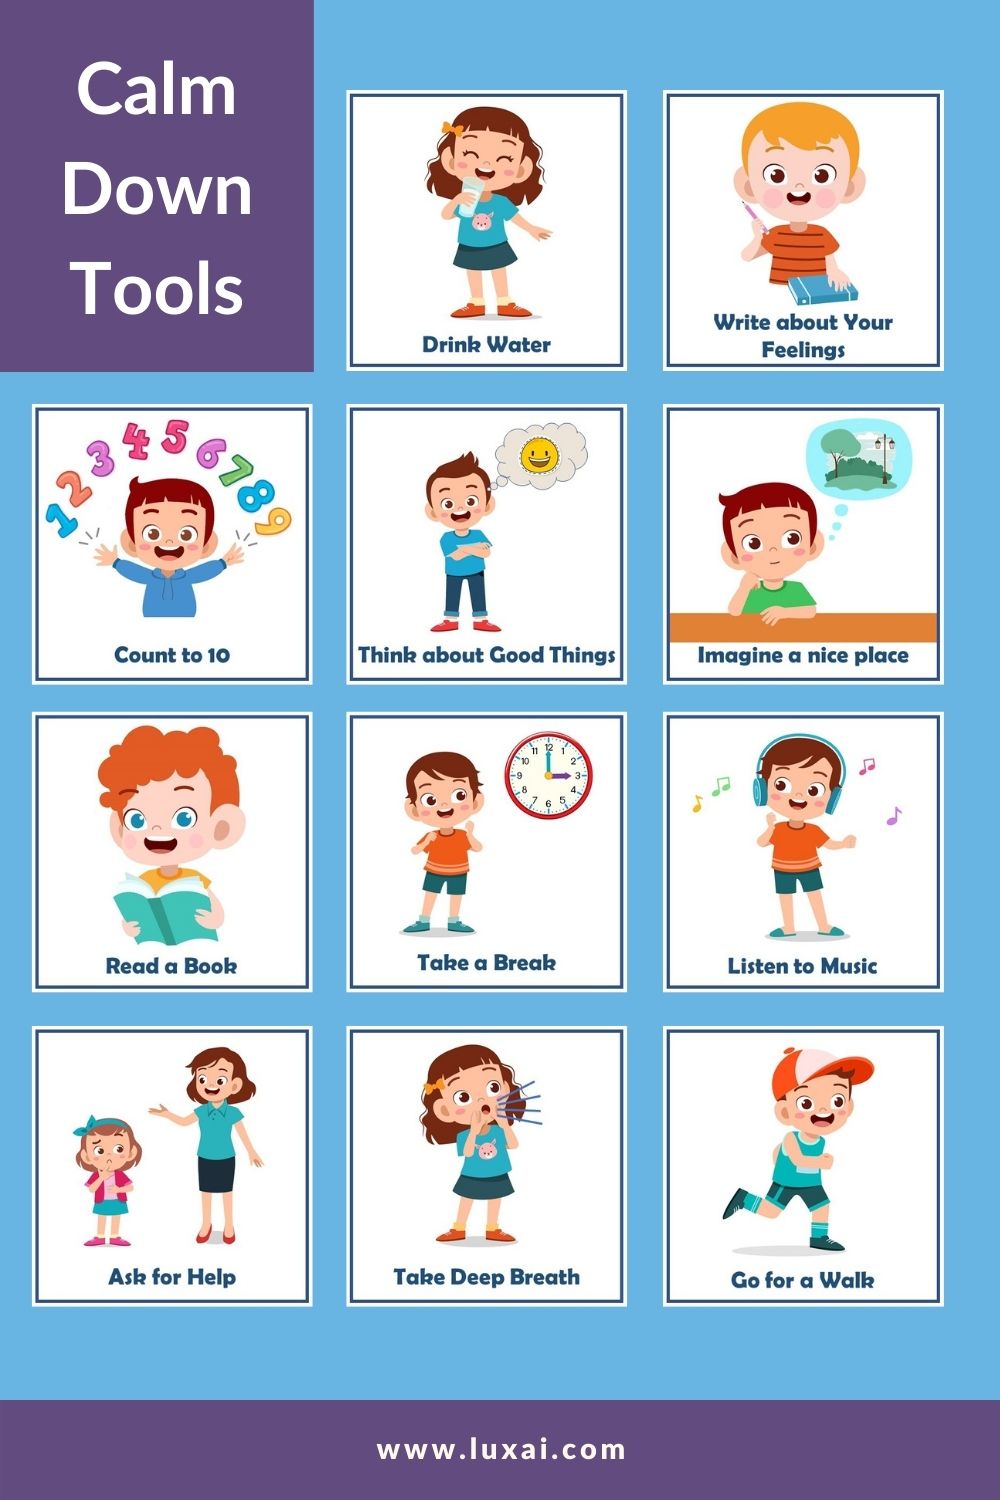 calm down tools for children with autism when stimming or stereotyped behaviours are in response to anxiety, stress or challenges 